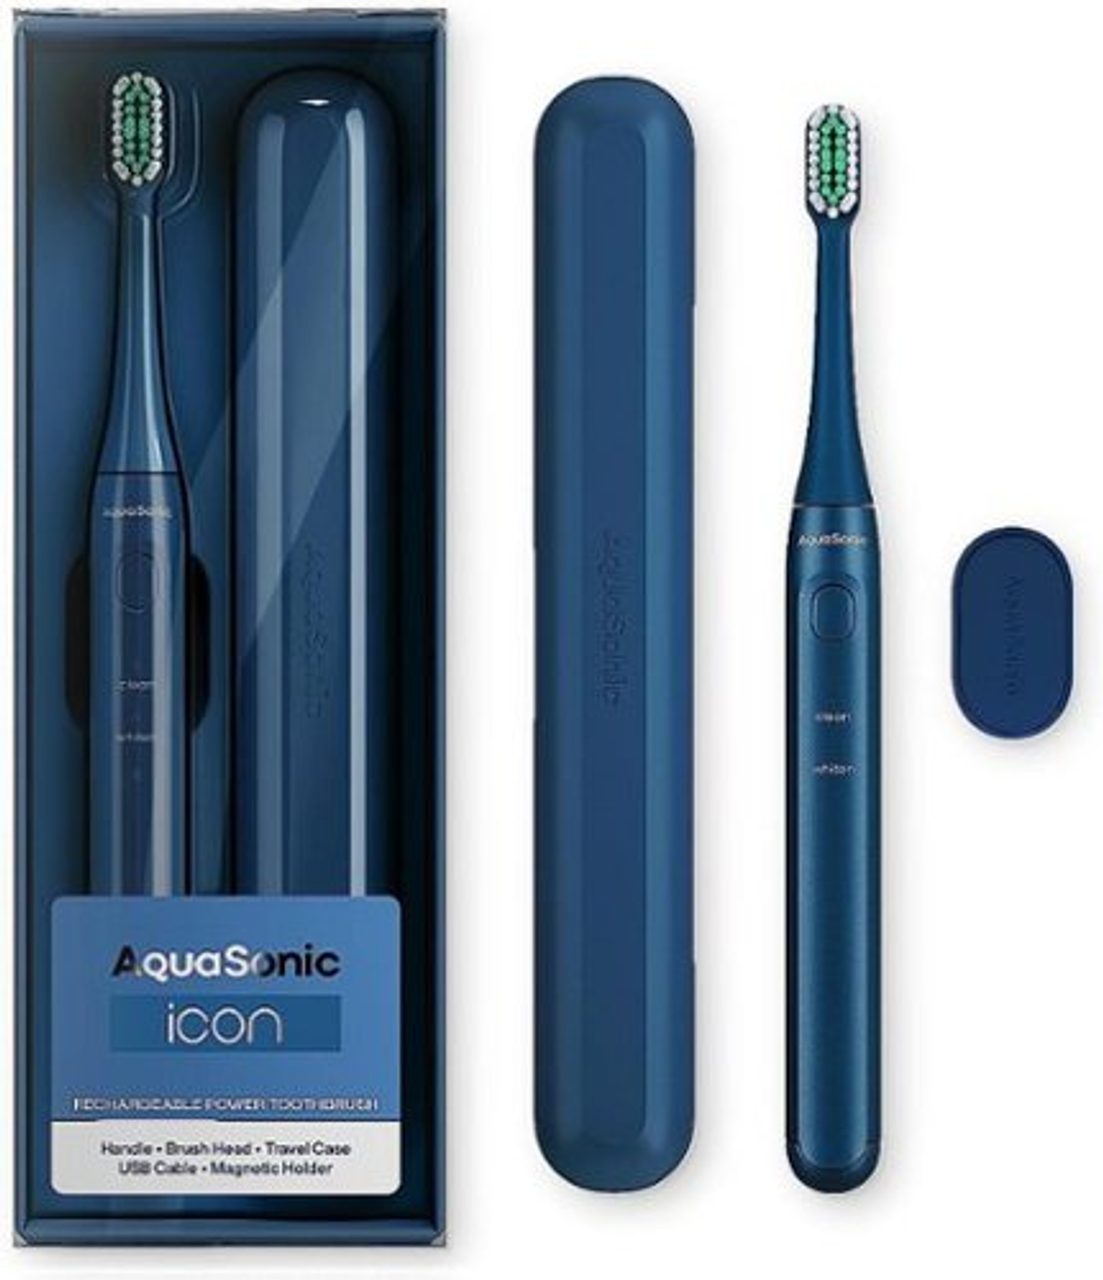 AquaSonic Icon Rechargeable Power Toothbrush | Magnetic Holder & Slim Travel Case - Navy - Navy